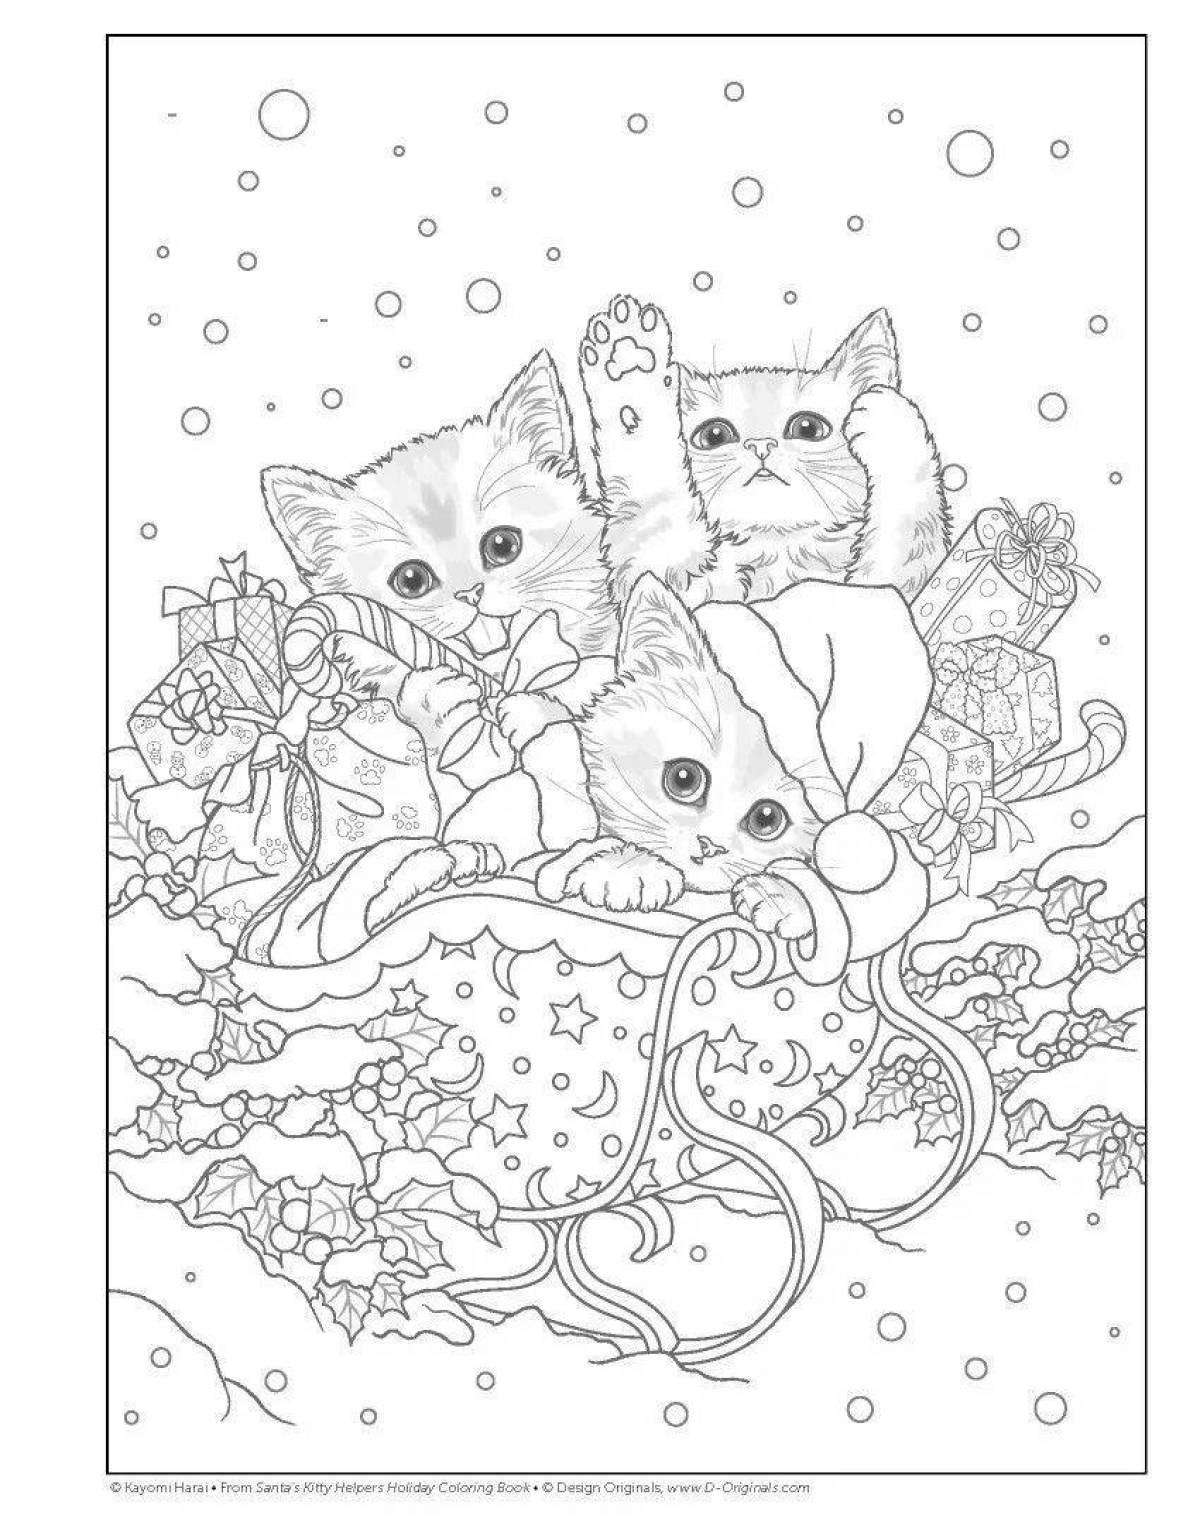 Live new year cat coloring